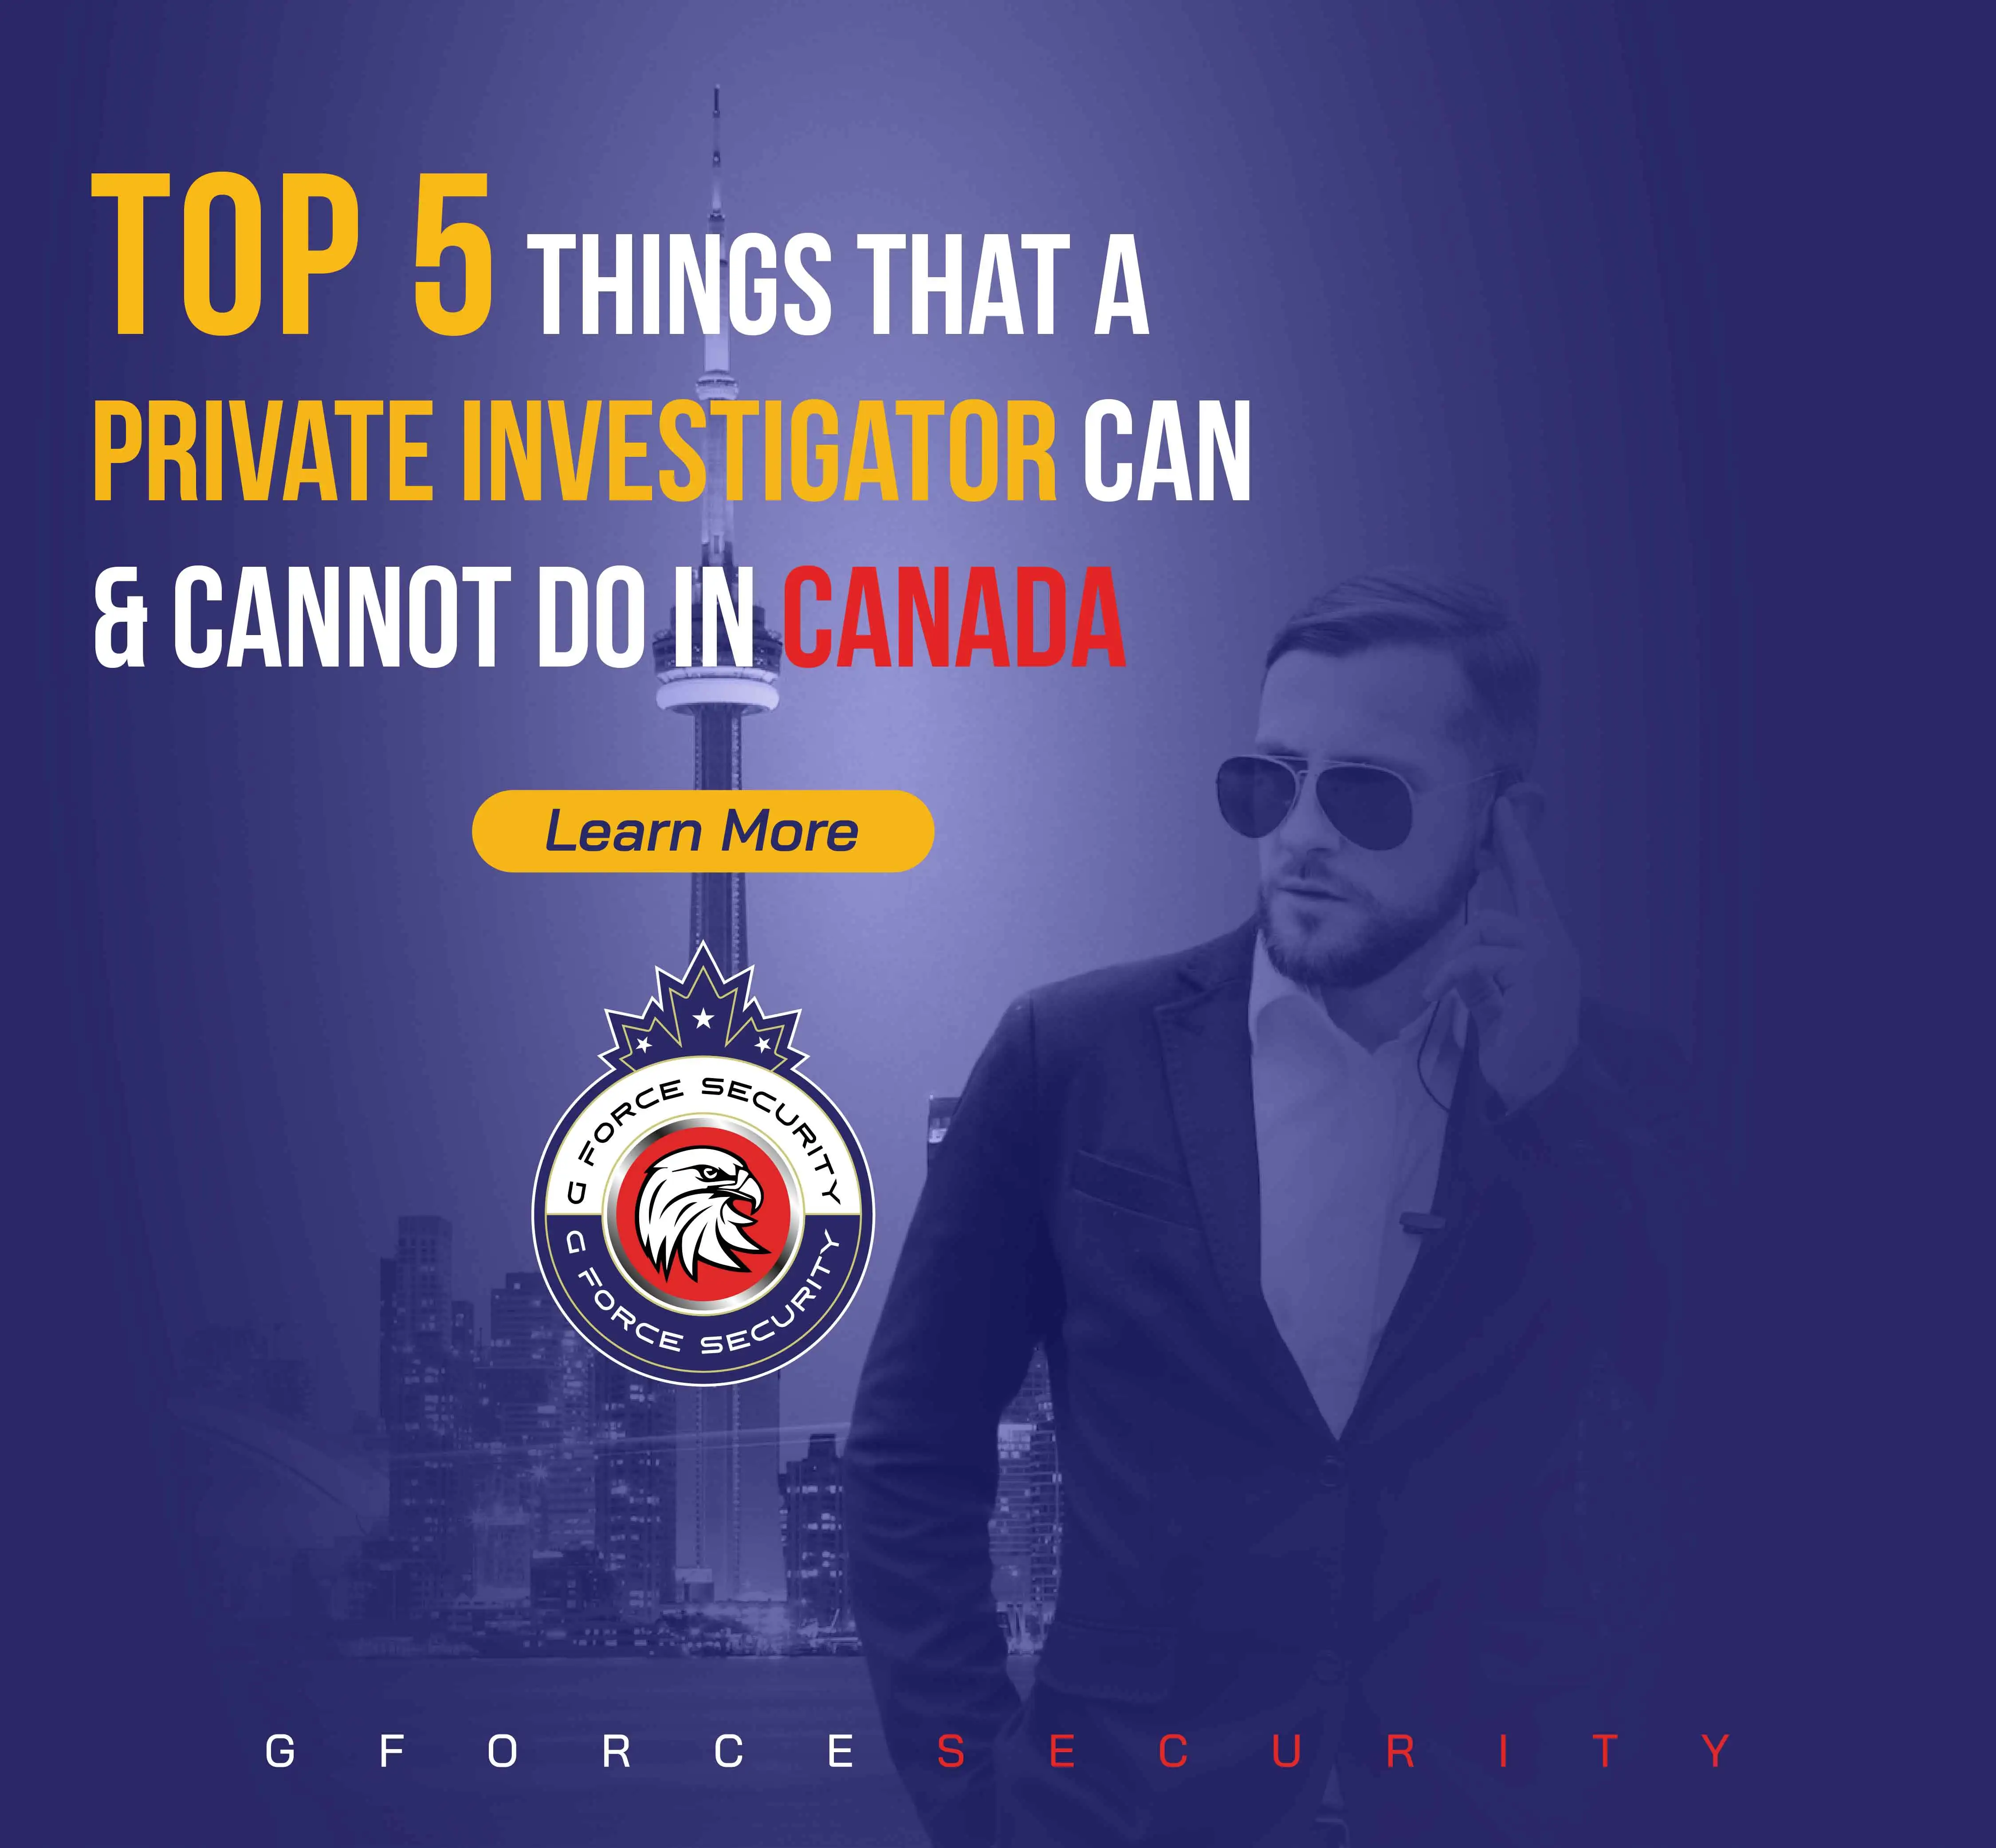 Top 5 Things that a Private Investigator Can & Cannot Do in Canada